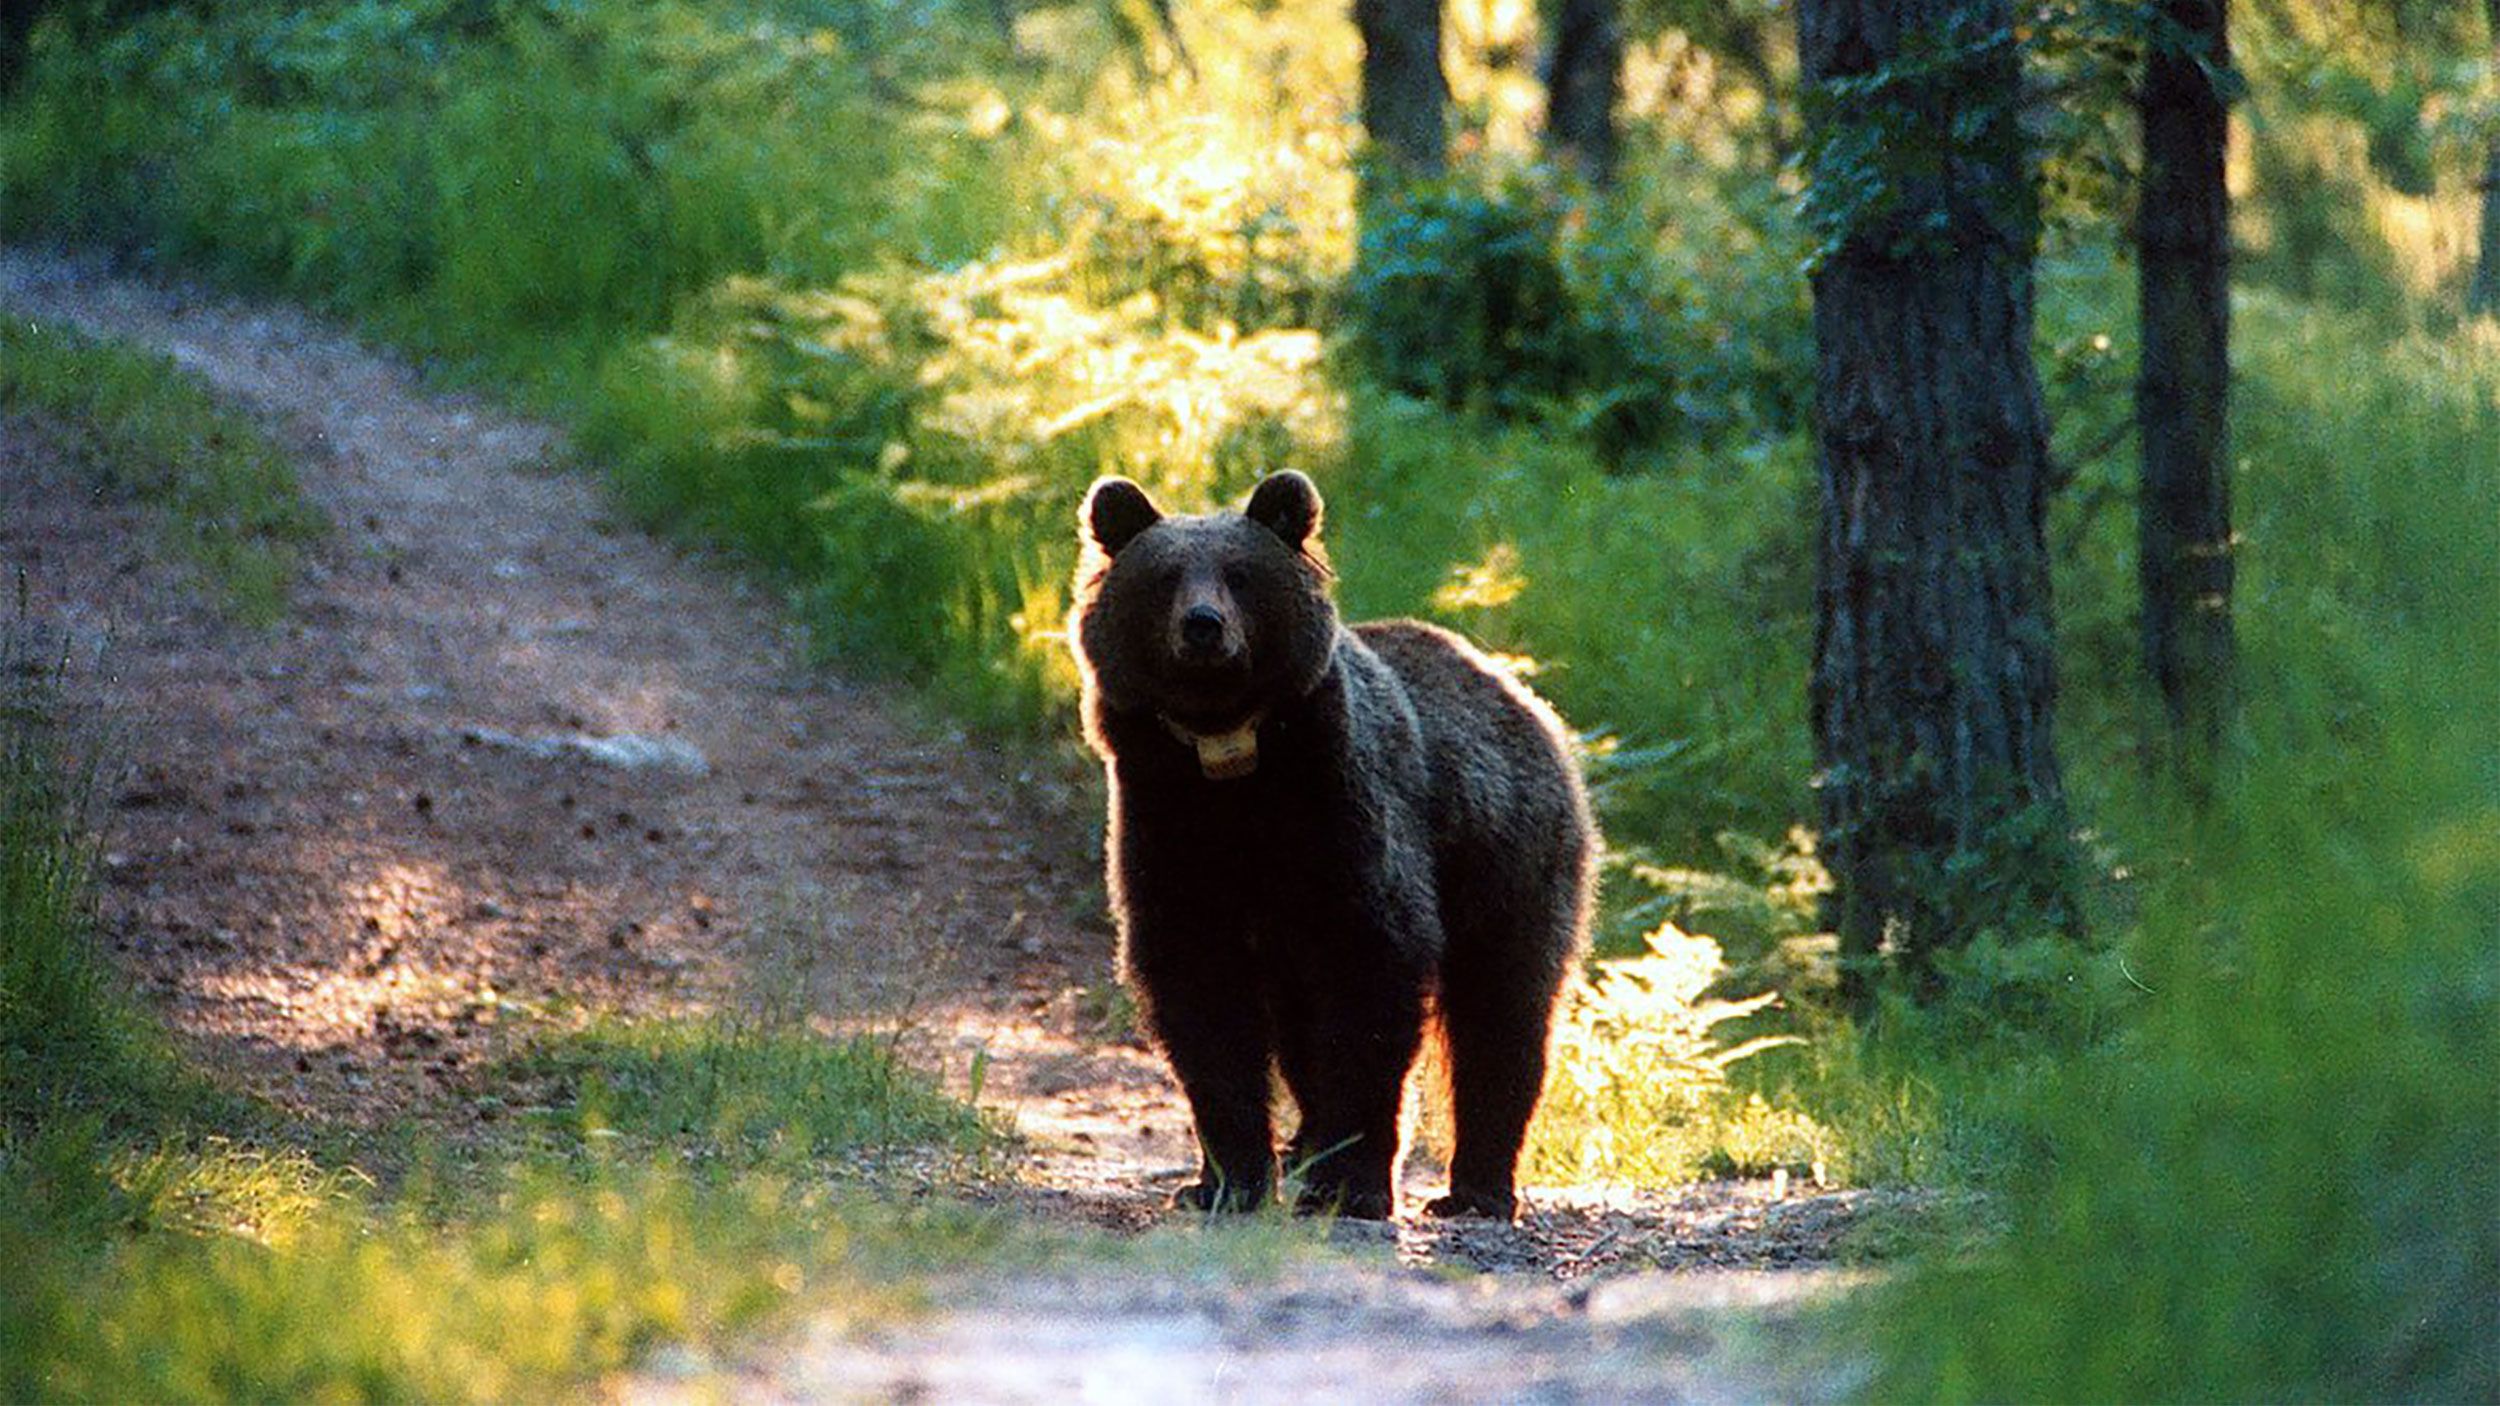 Bear with 3 Cubs Captured Weeks After Deadly Attack on Hiker in Italy